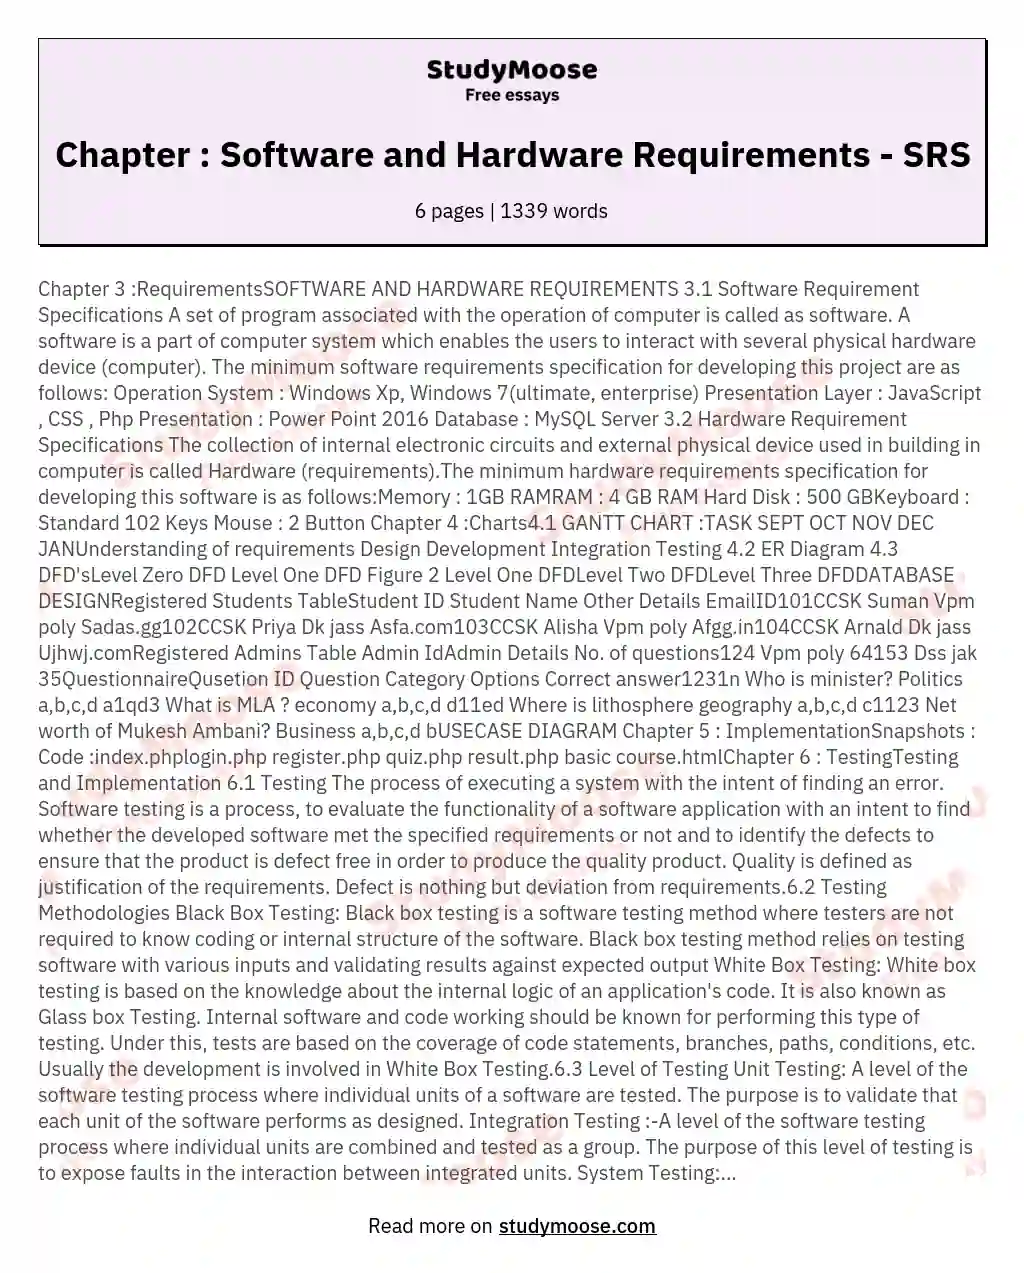 Chapter : Software and Hardware Requirements - SRS